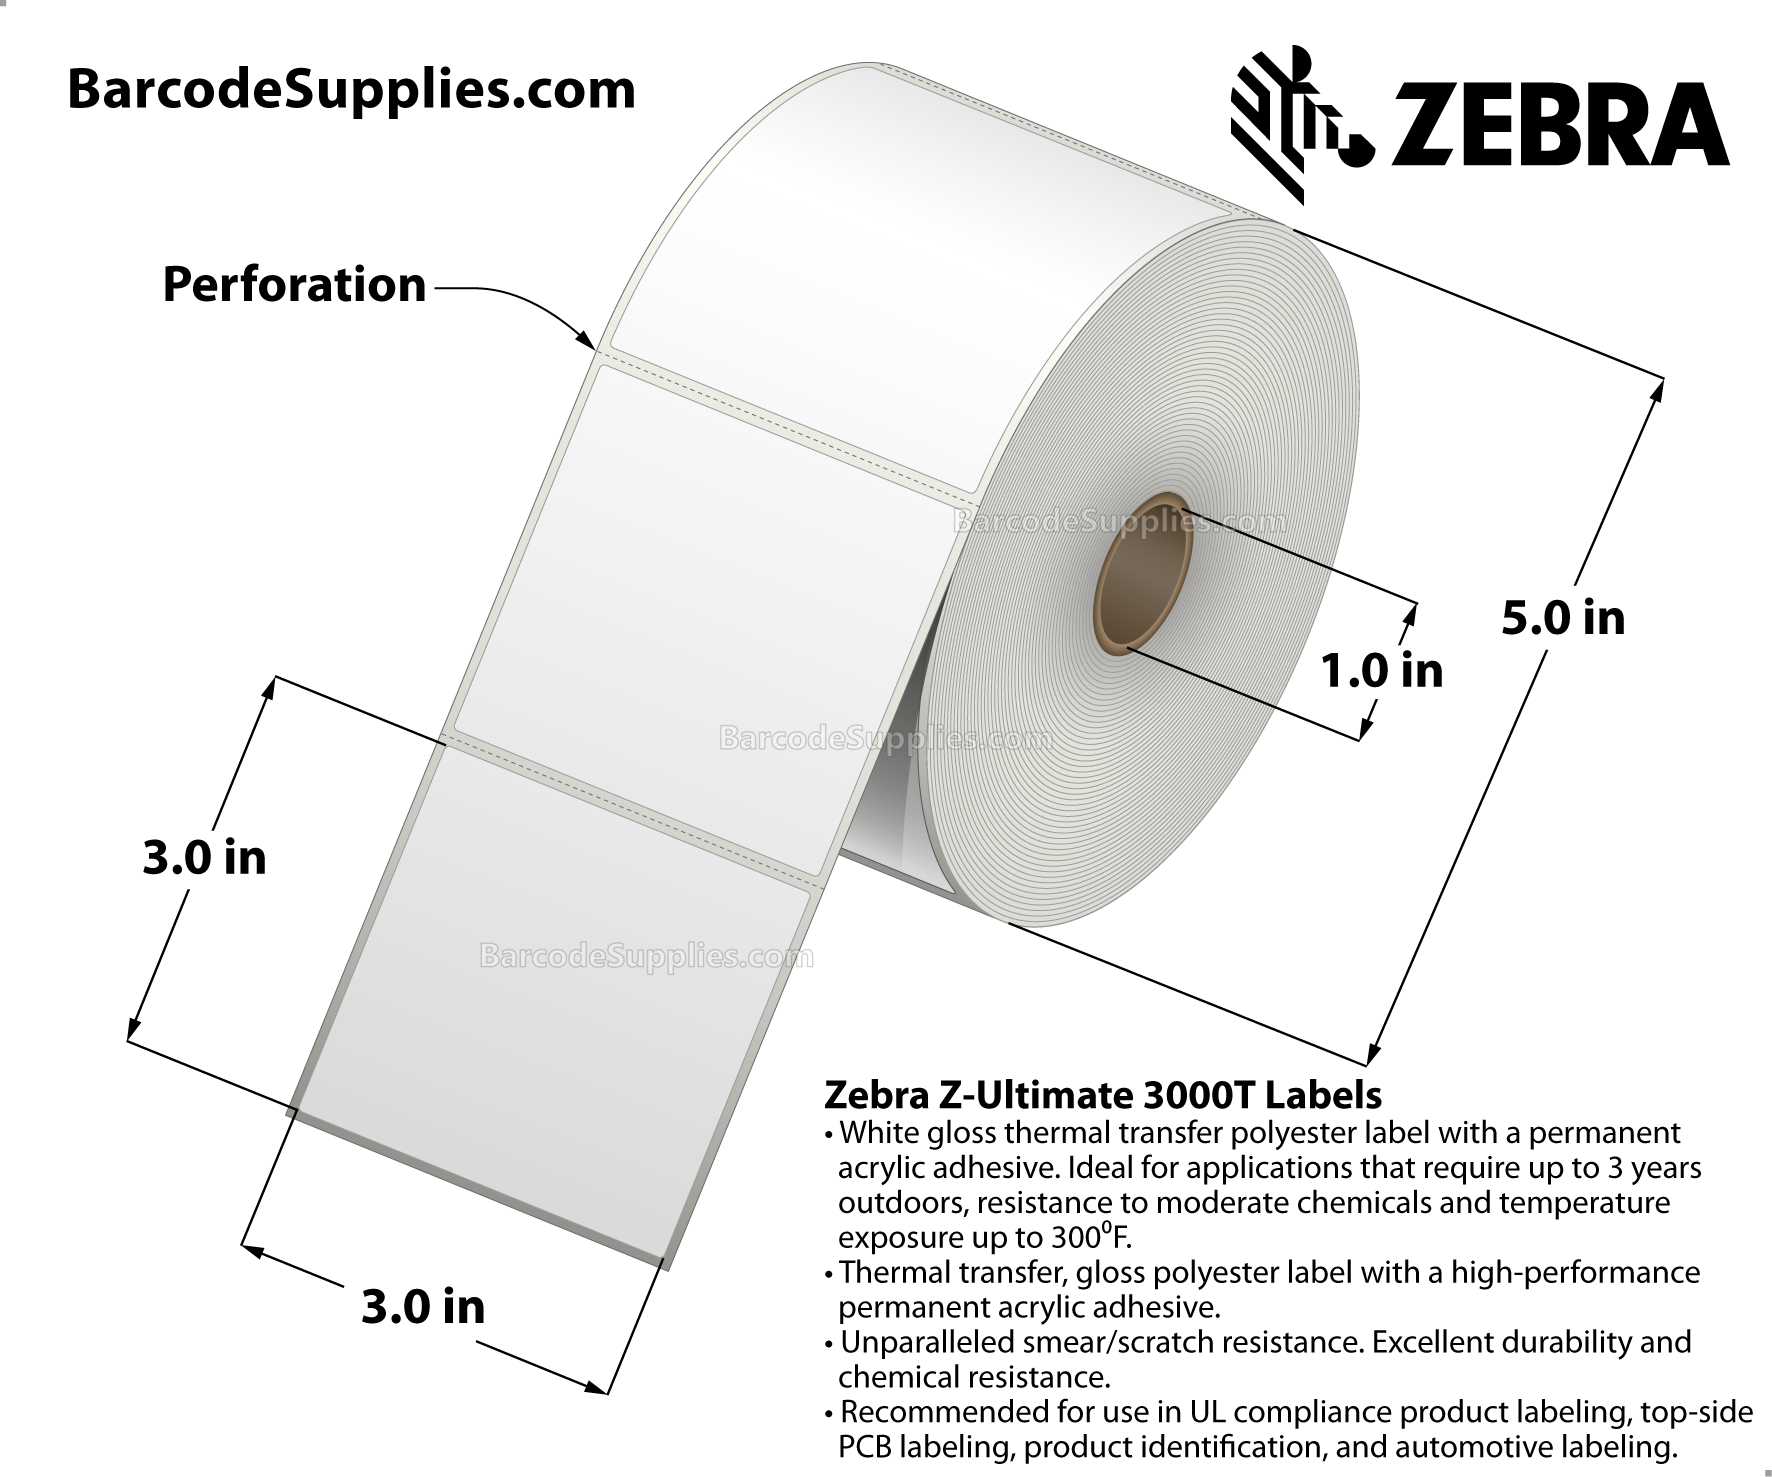 3 x 3 Thermal Transfer White Z-Ultimate 3000T Labels With Permanent Adhesive - Perforated - 910 Labels Per Roll - Carton Of 8 Rolls - 7280 Labels Total - MPN: 18942